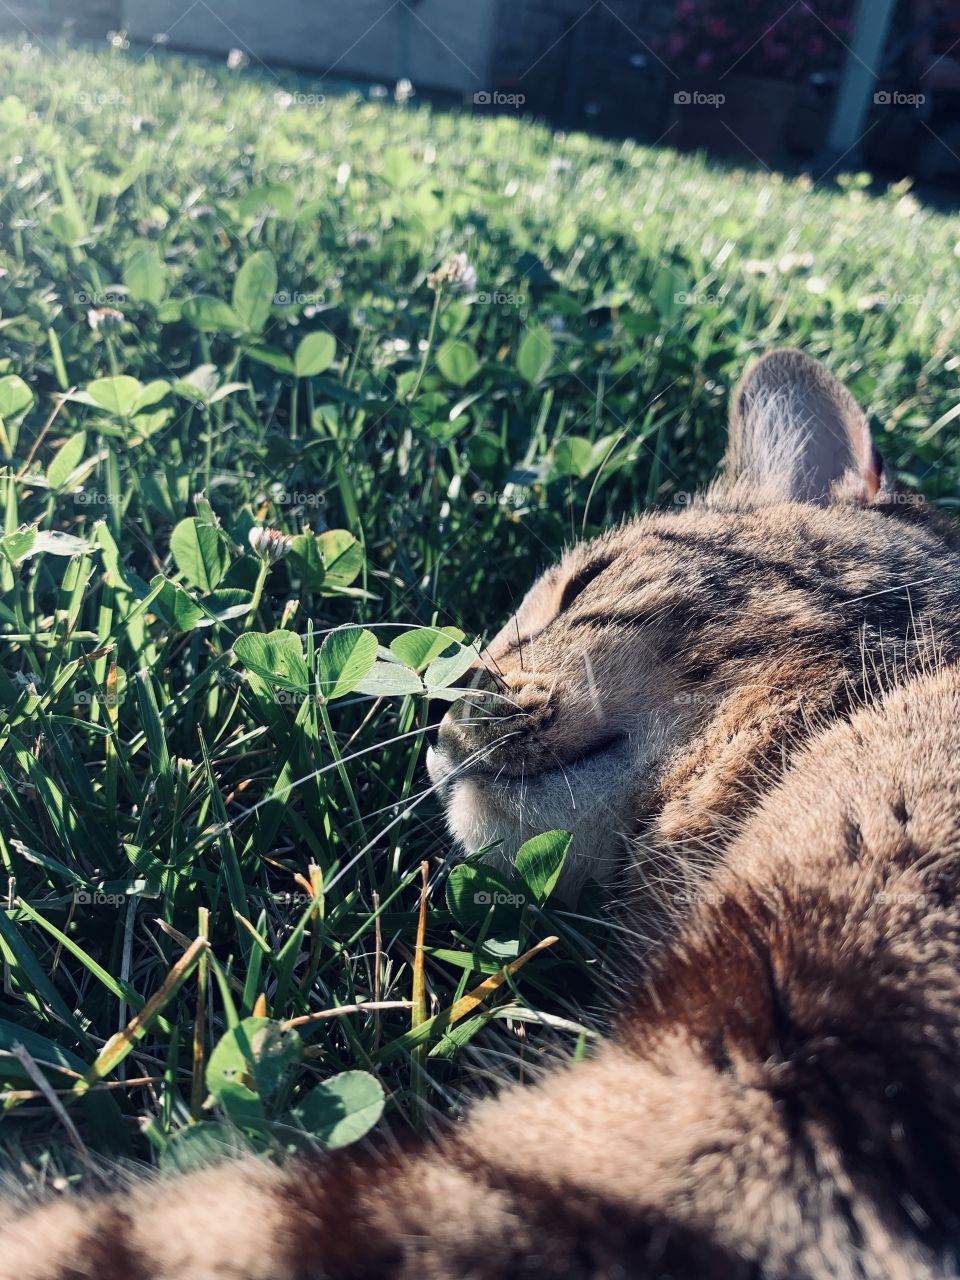 Cat photography in ny backyard taken with an iphone xr. My cat is very photogenic and loves to be the center of attention. 